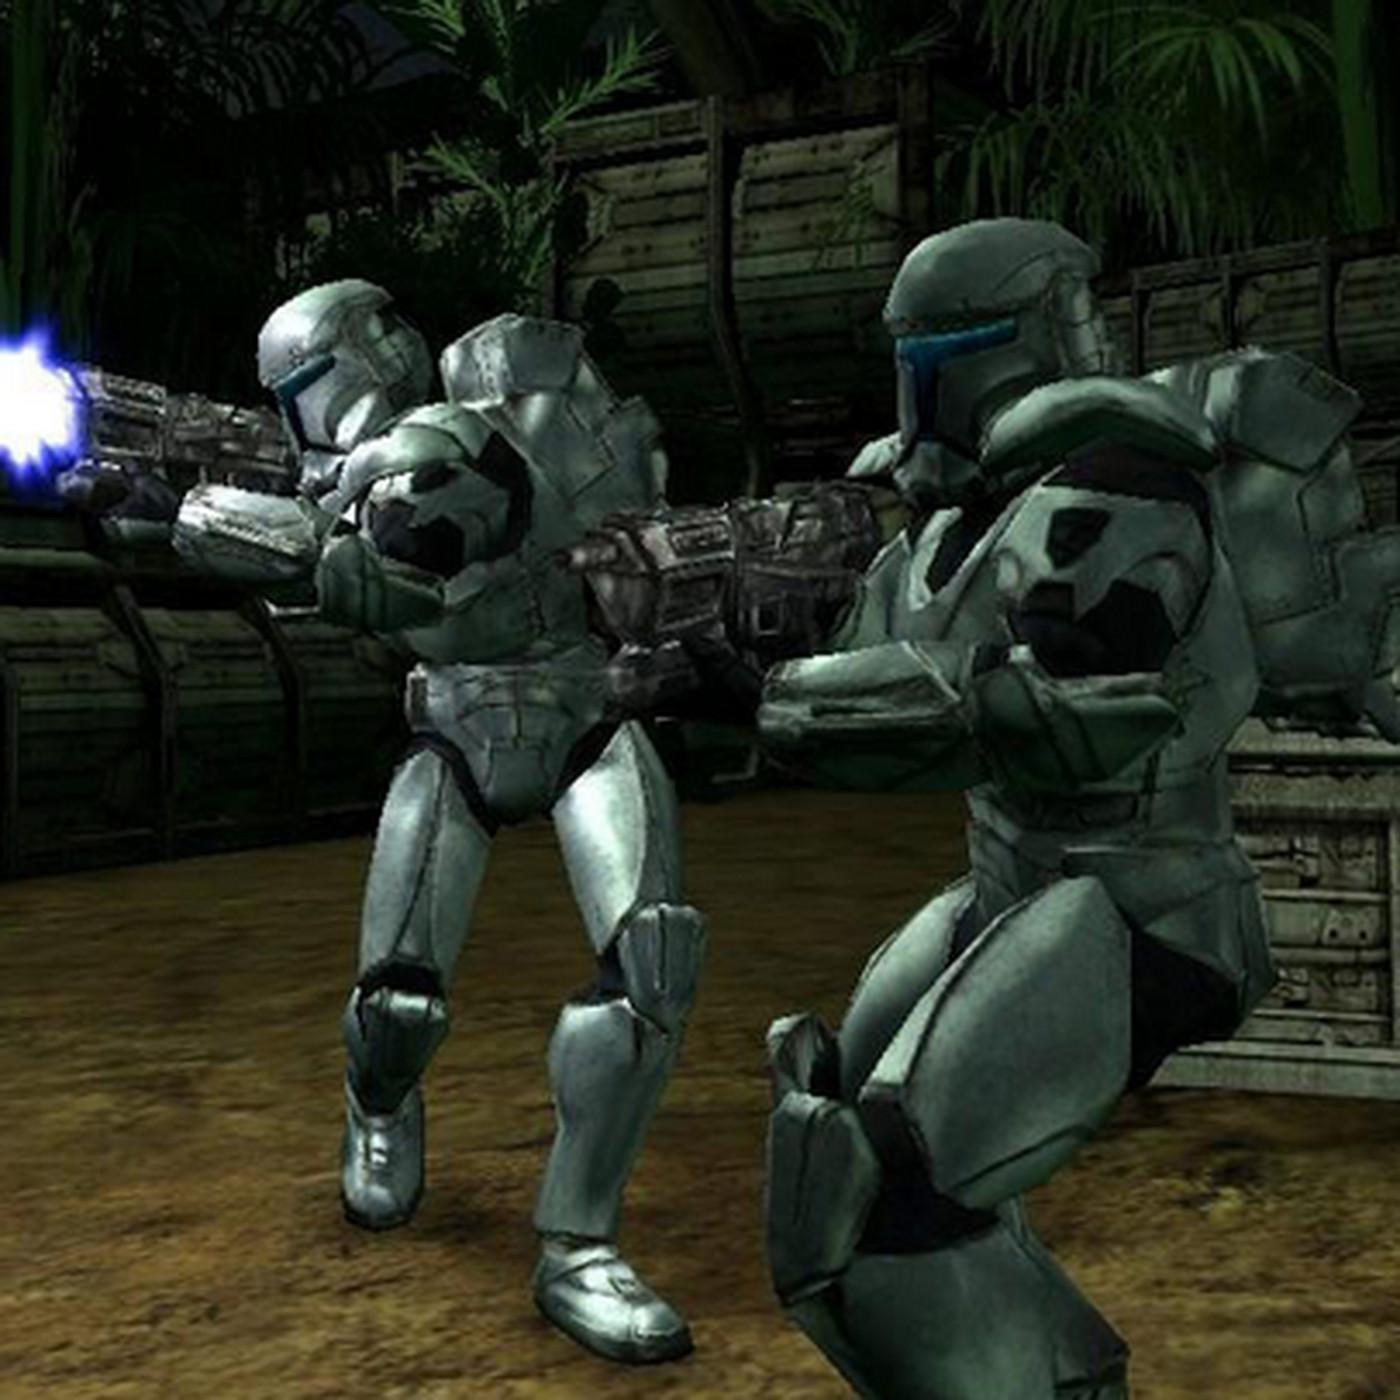 Star Wars: Republic Commando's sniper made it out alive, says